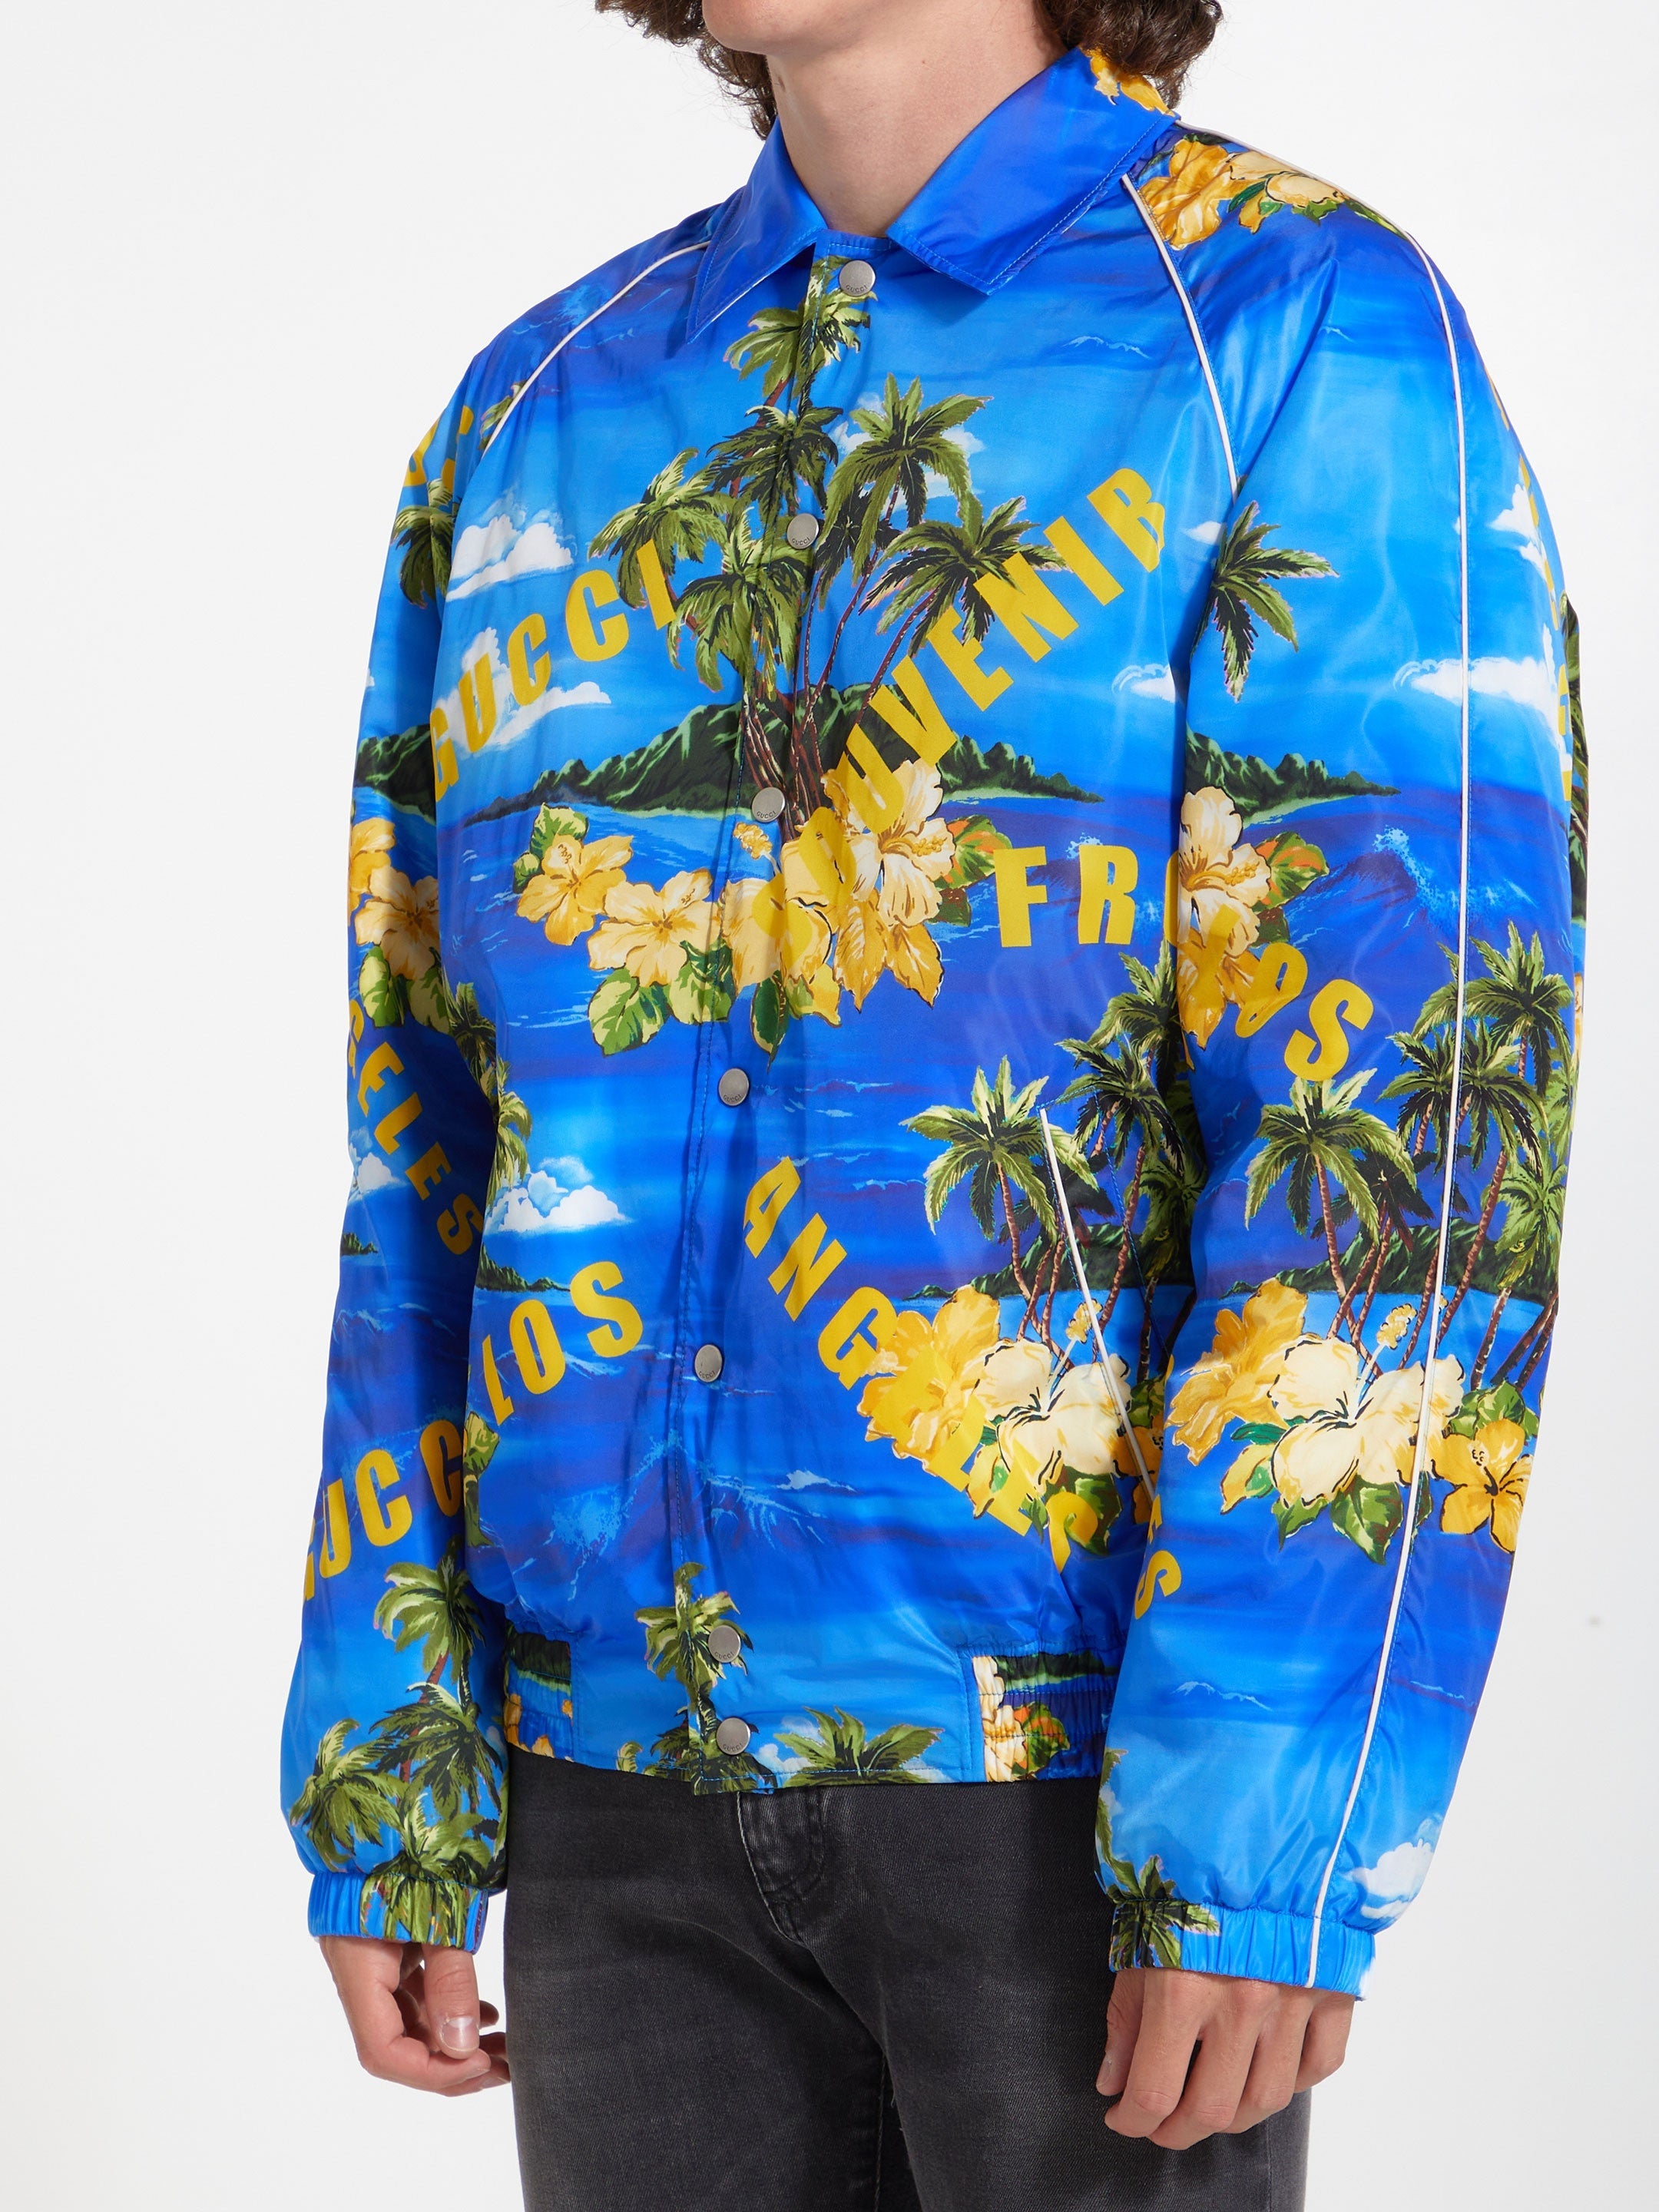 GUCCI-OUTLET-SALE-Nylon-jacket-with-print-Jacken-Mantel-48-BLUE-ARCHIVE-COLLECTION-2.jpg